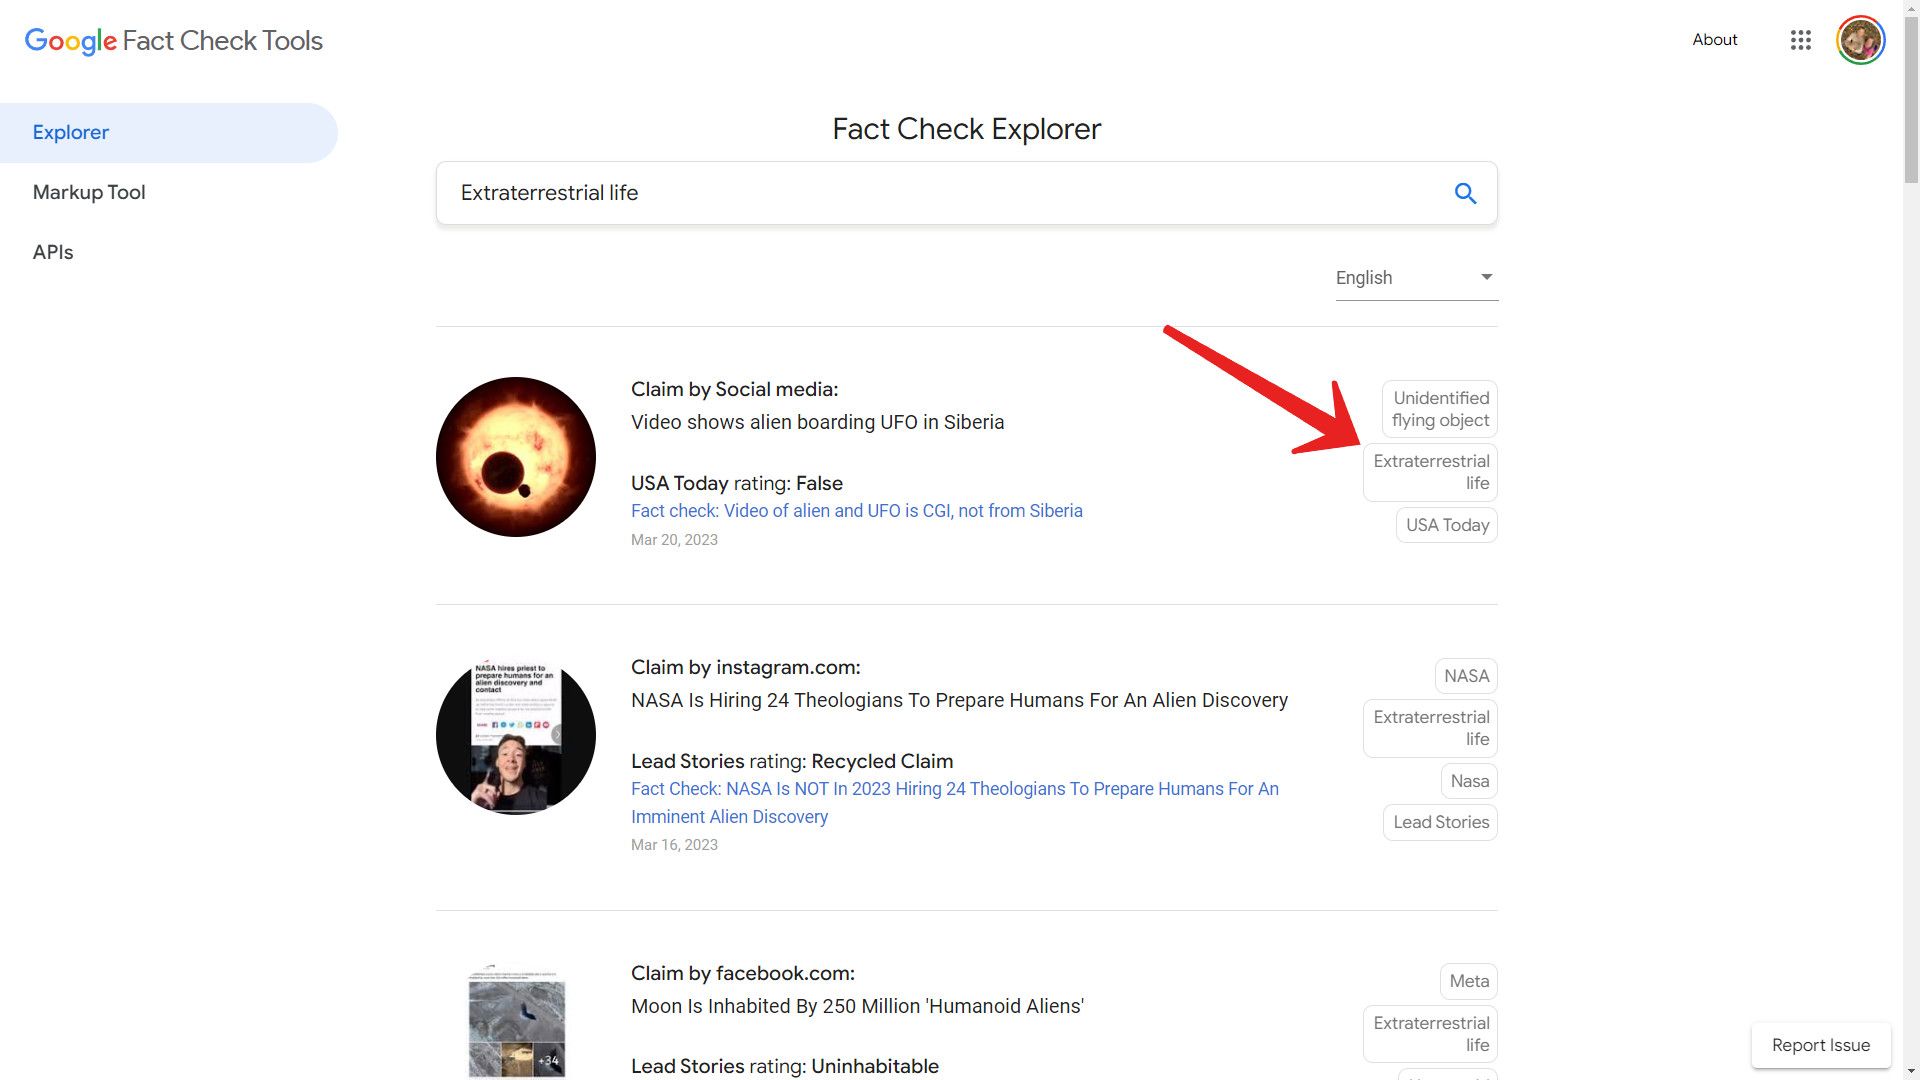 A screenshot of Google Fact Check Explorer showing the results after clicking a topic button.